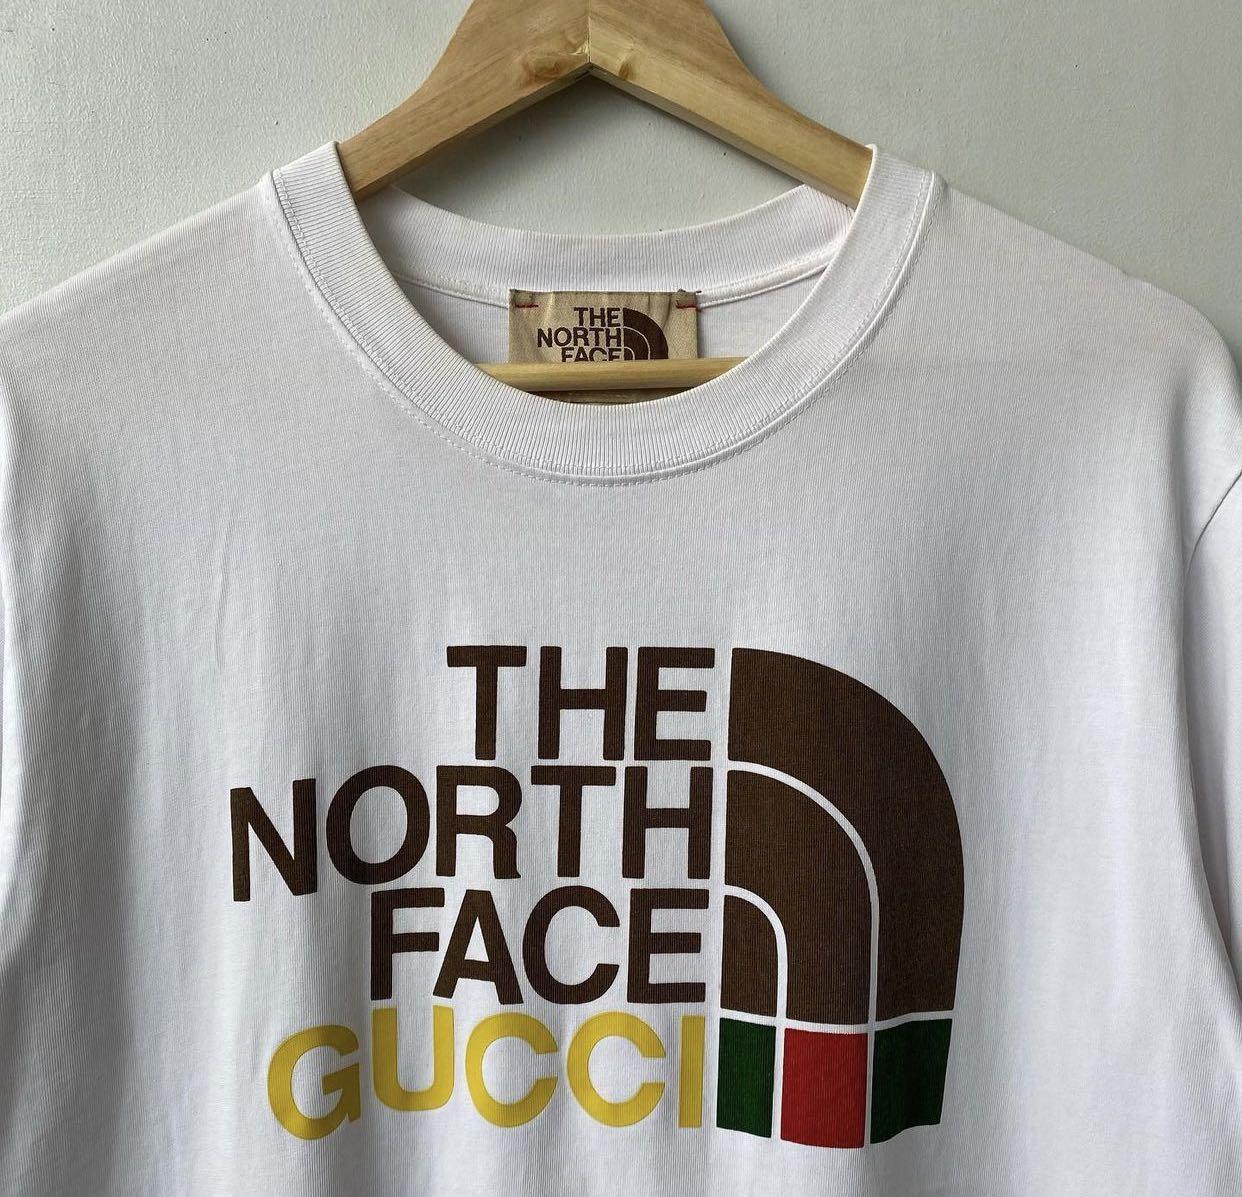 The North Face x Gucci t-shirt White – Limited Supply ZA